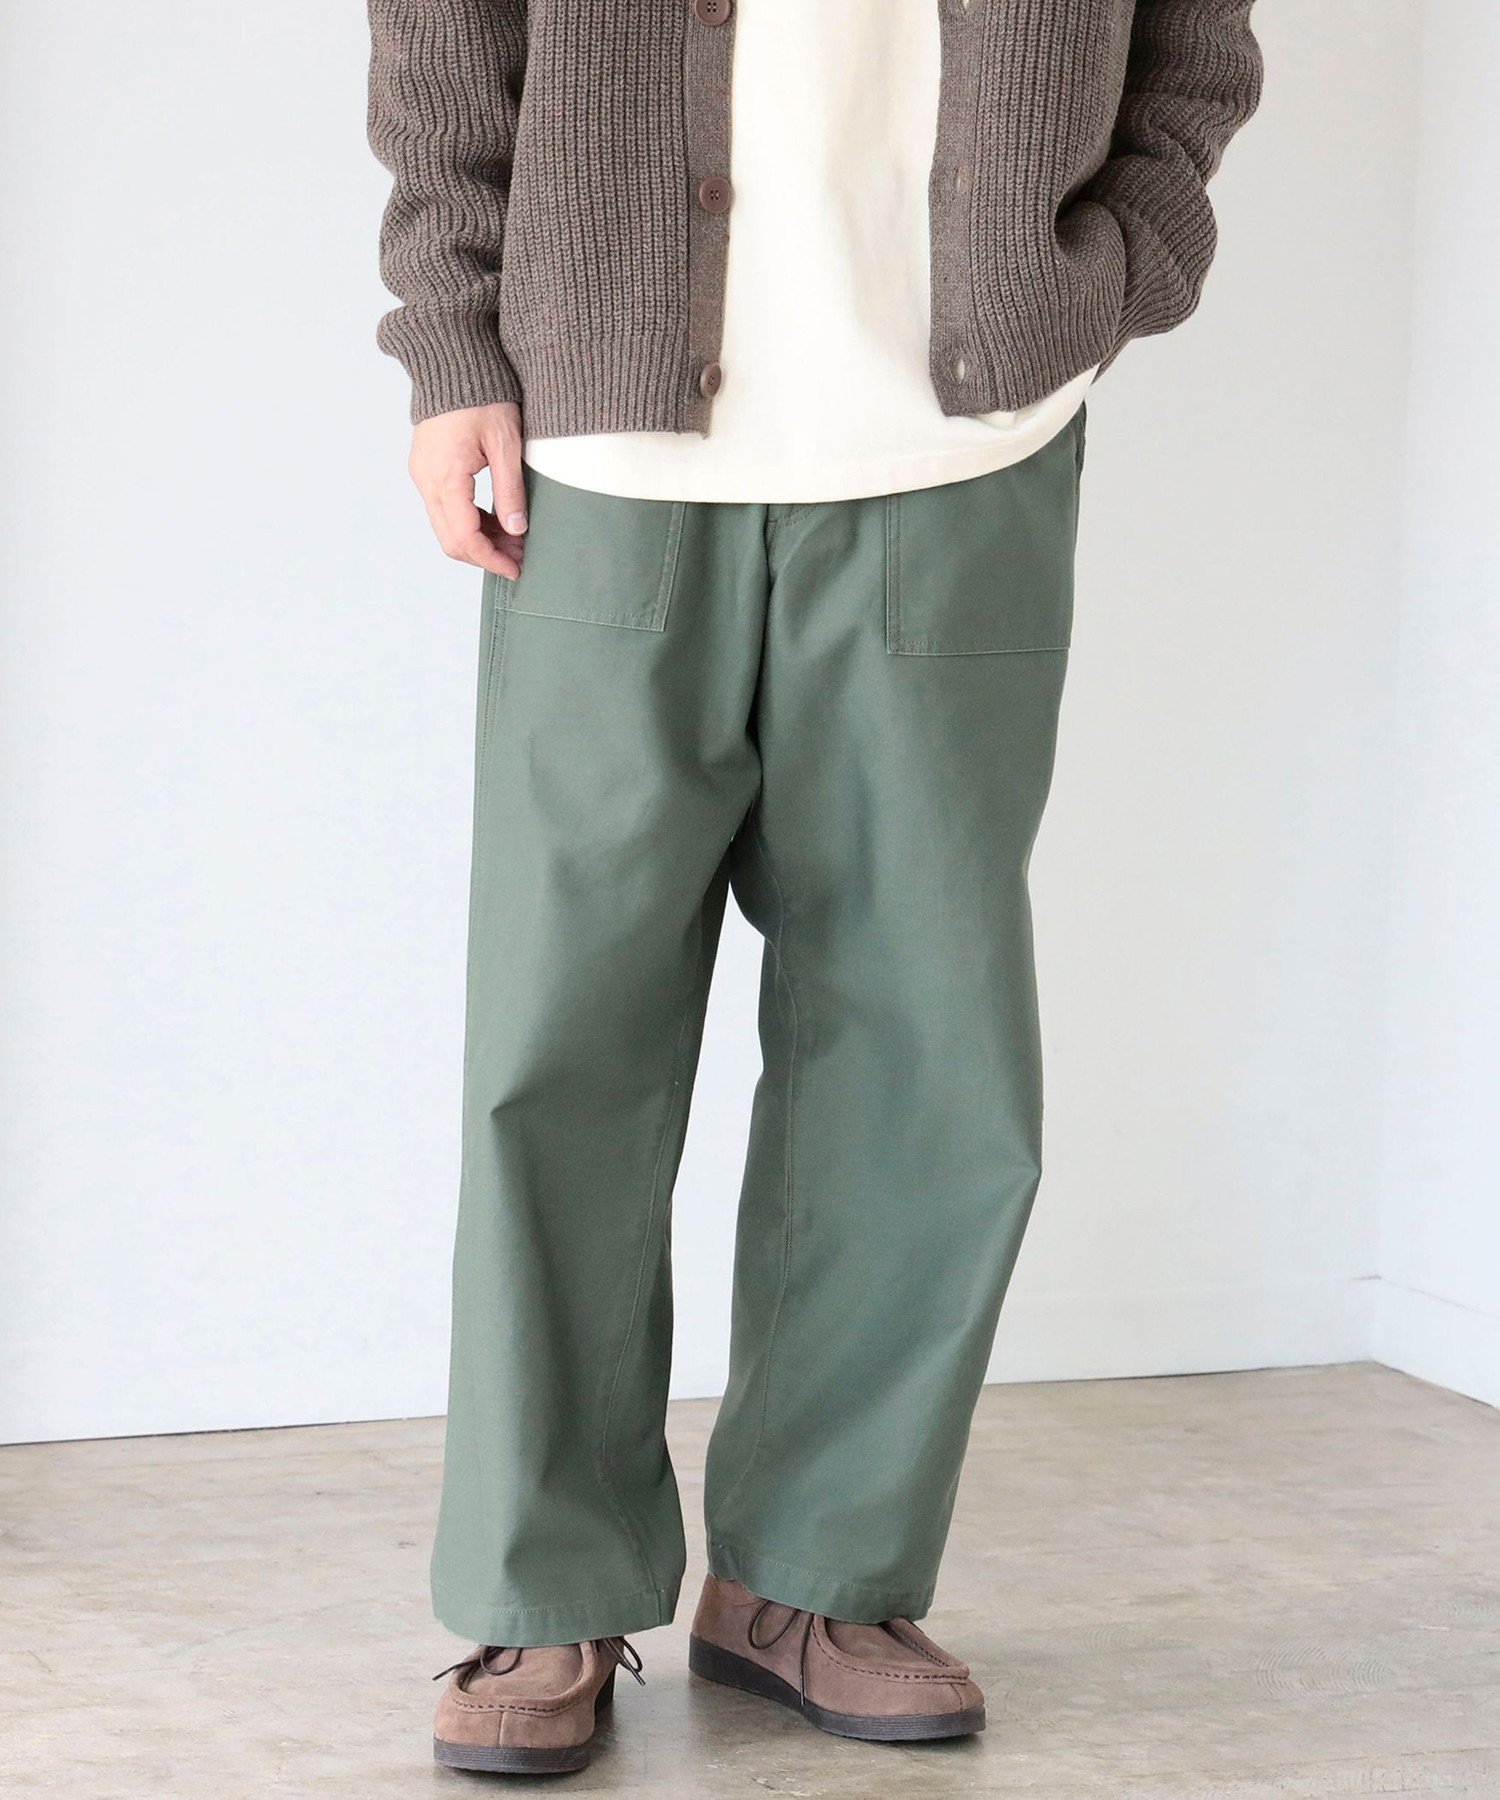 【SALE／60%OFF】B:MING by BEAMS GUNG HO x B:MING by BEAMS / 別注 4POCKET WIDE FATIGUE TROUSER ビームス アウトレット パンツ その他のパンツ カーキ ブラック【送料無料】